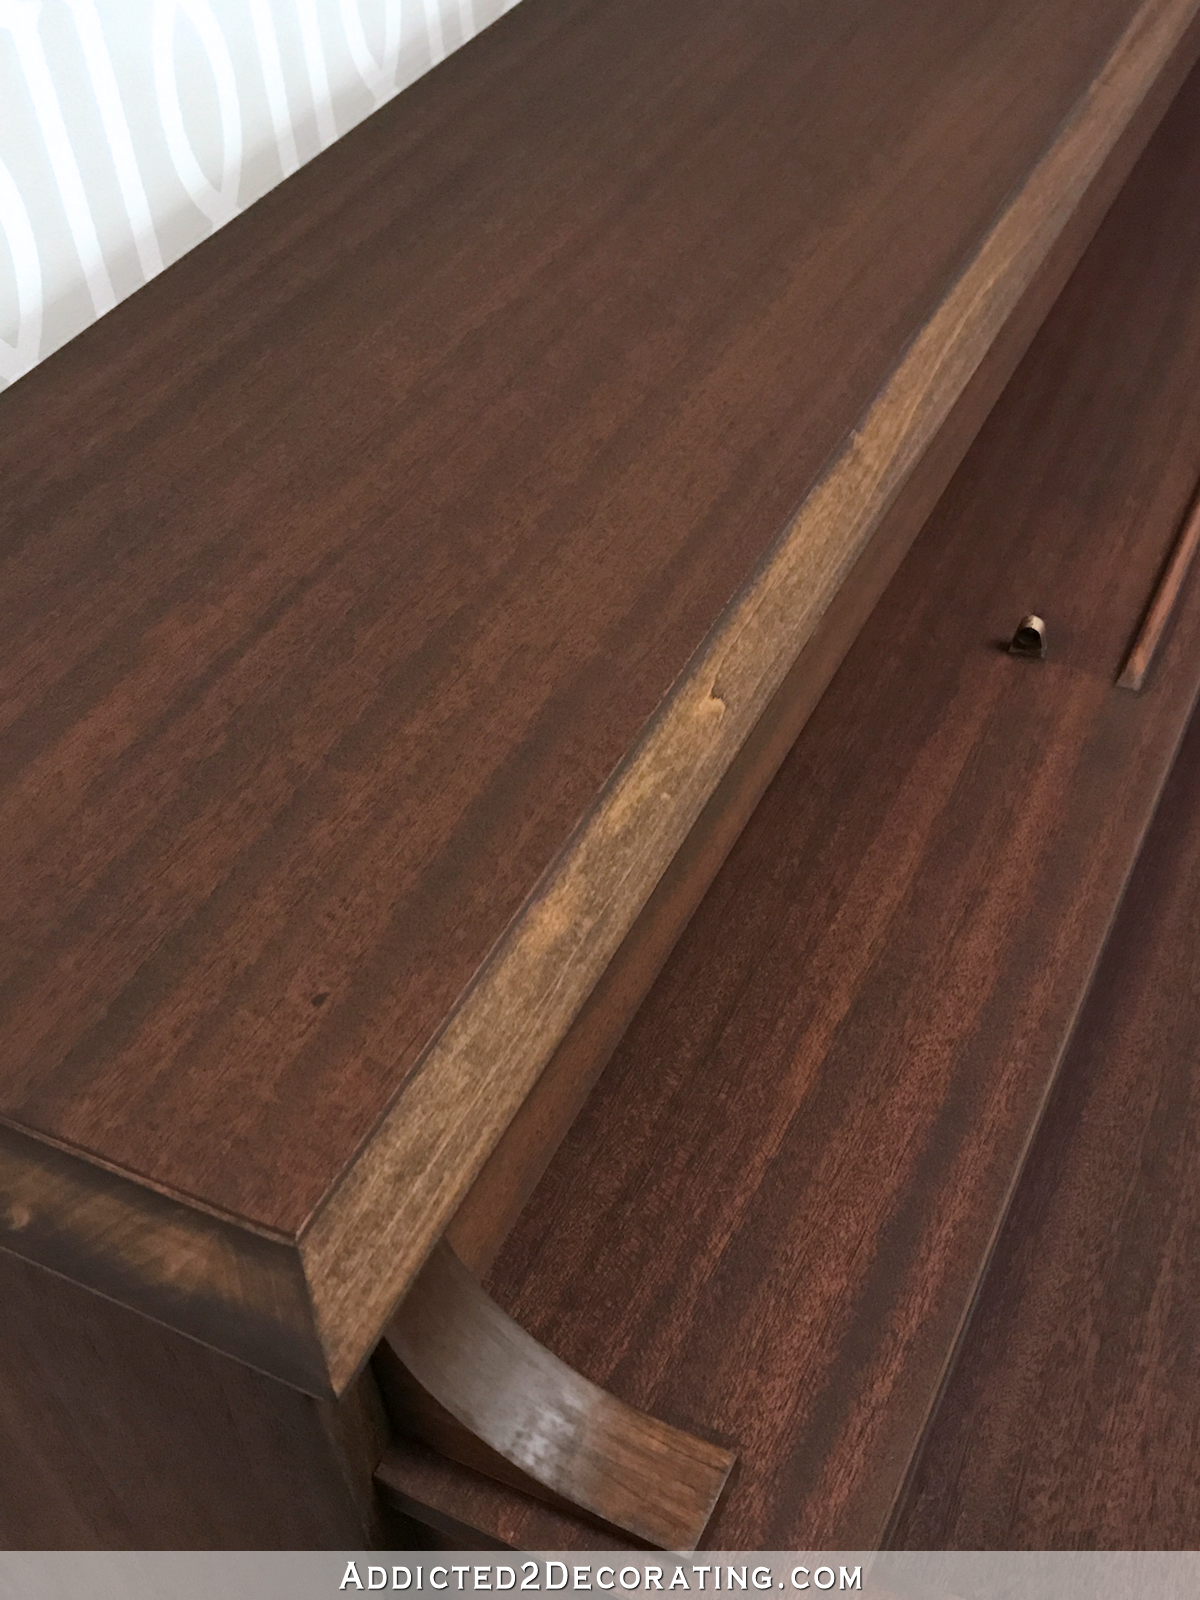 My Little Spinet Piano – Completely Stripped And Restained